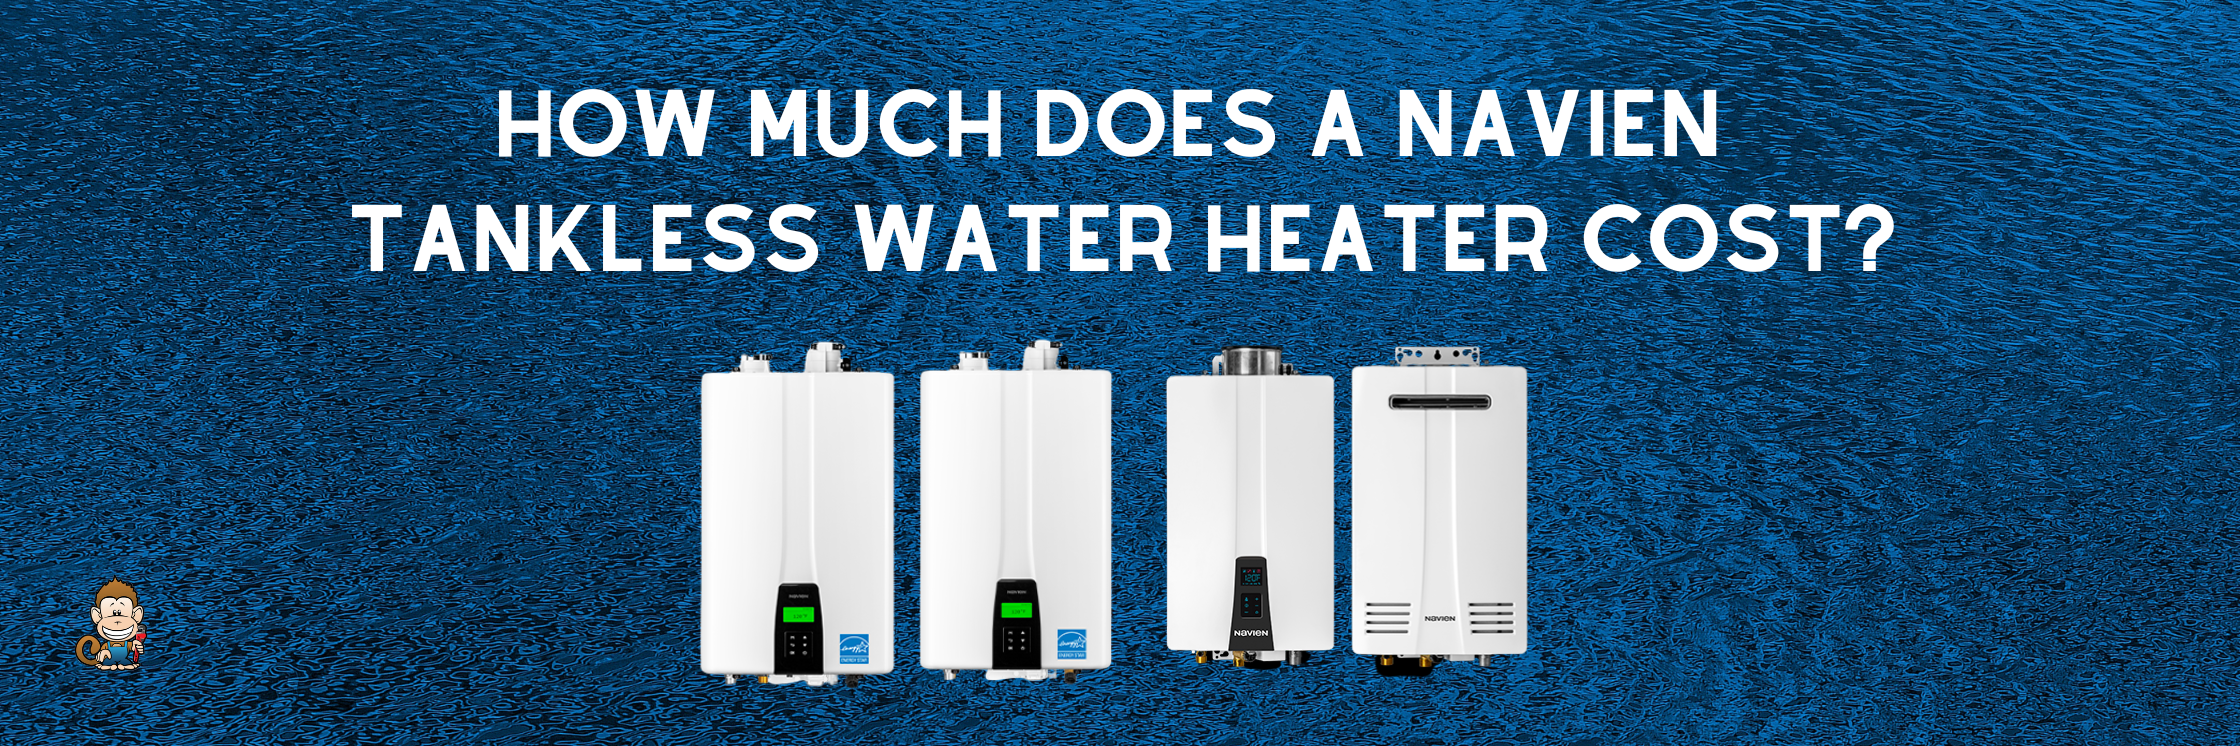 How Much Does a Navien Tankless Water Heater Cost?